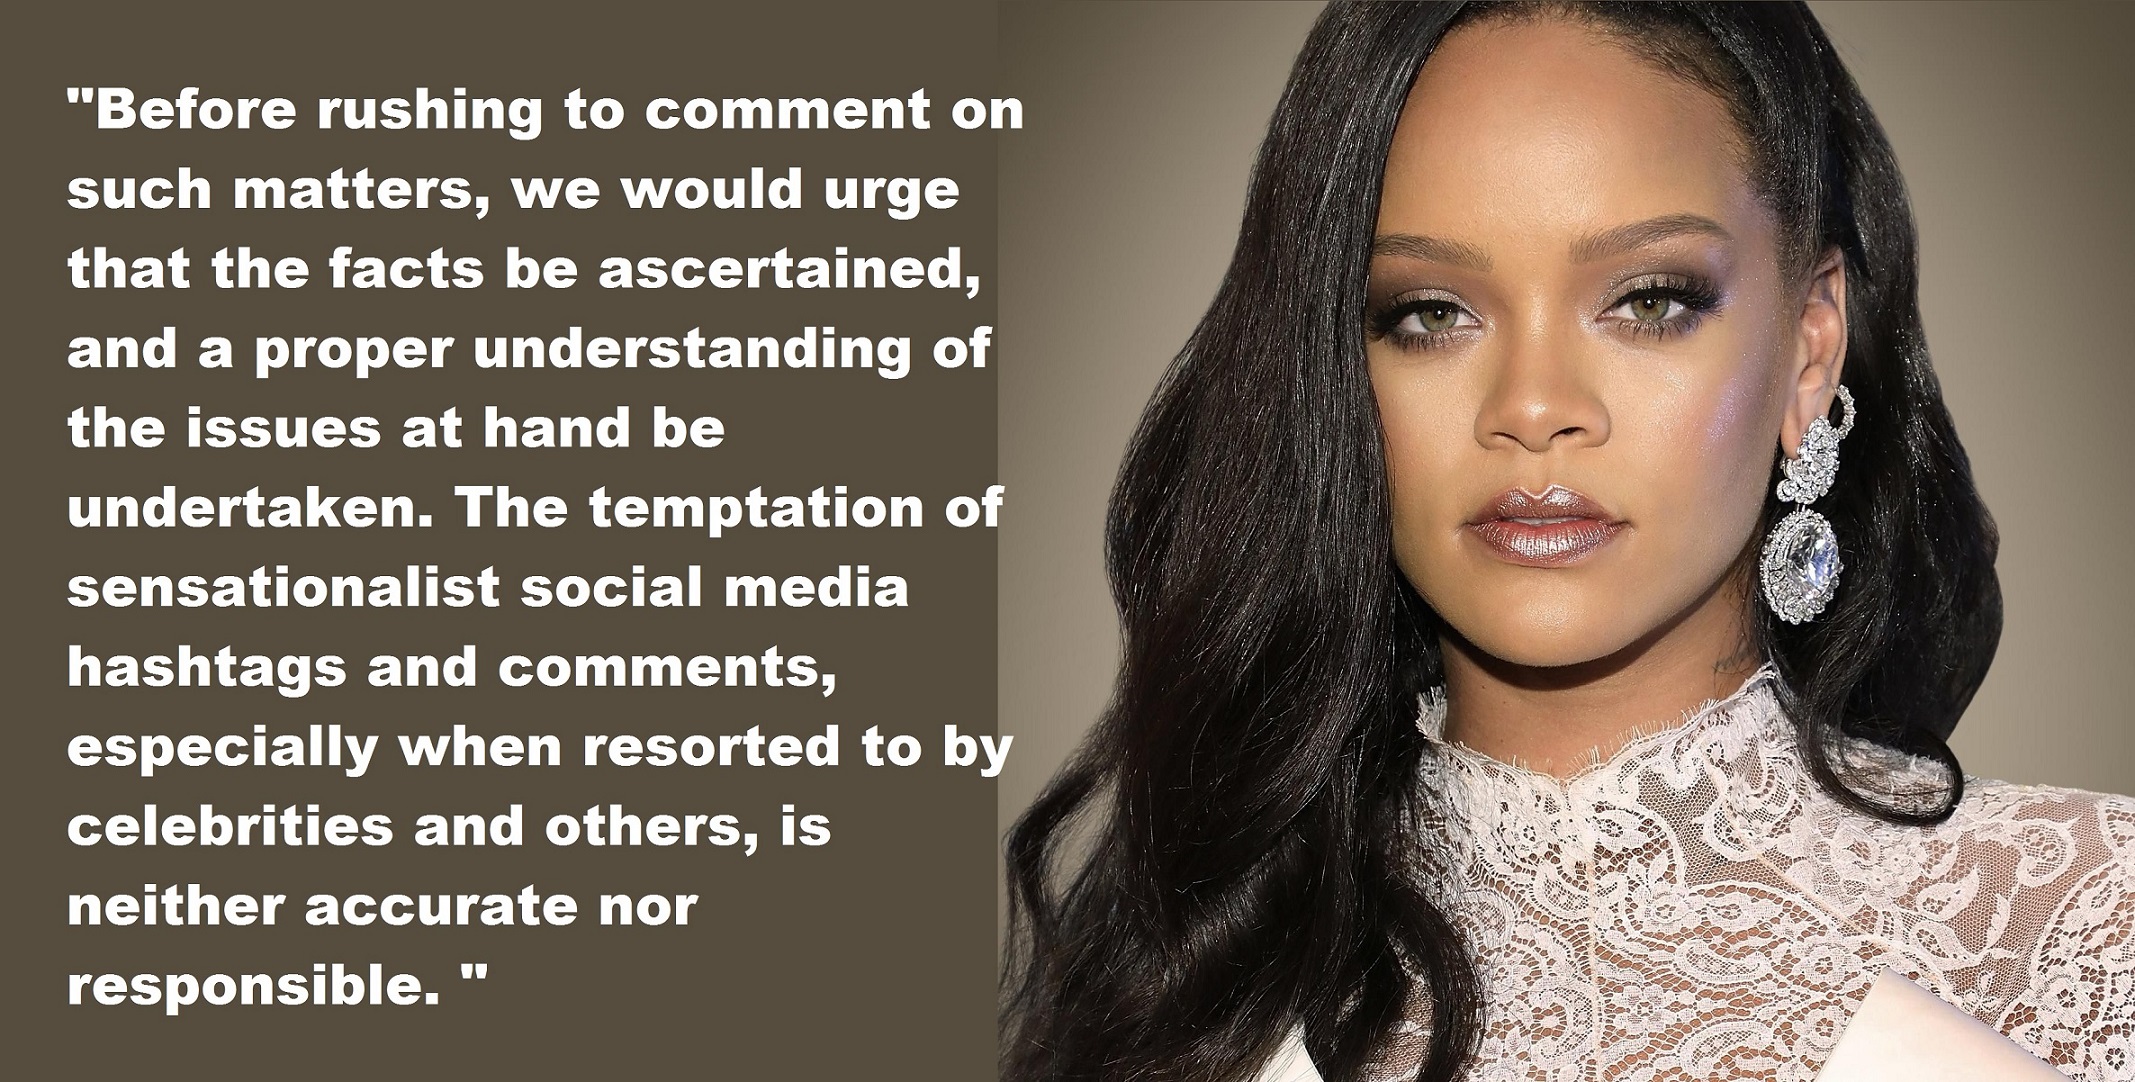 Indian Government Releases Strong Statement After Rihanna Tweets on Farmer’s Protests